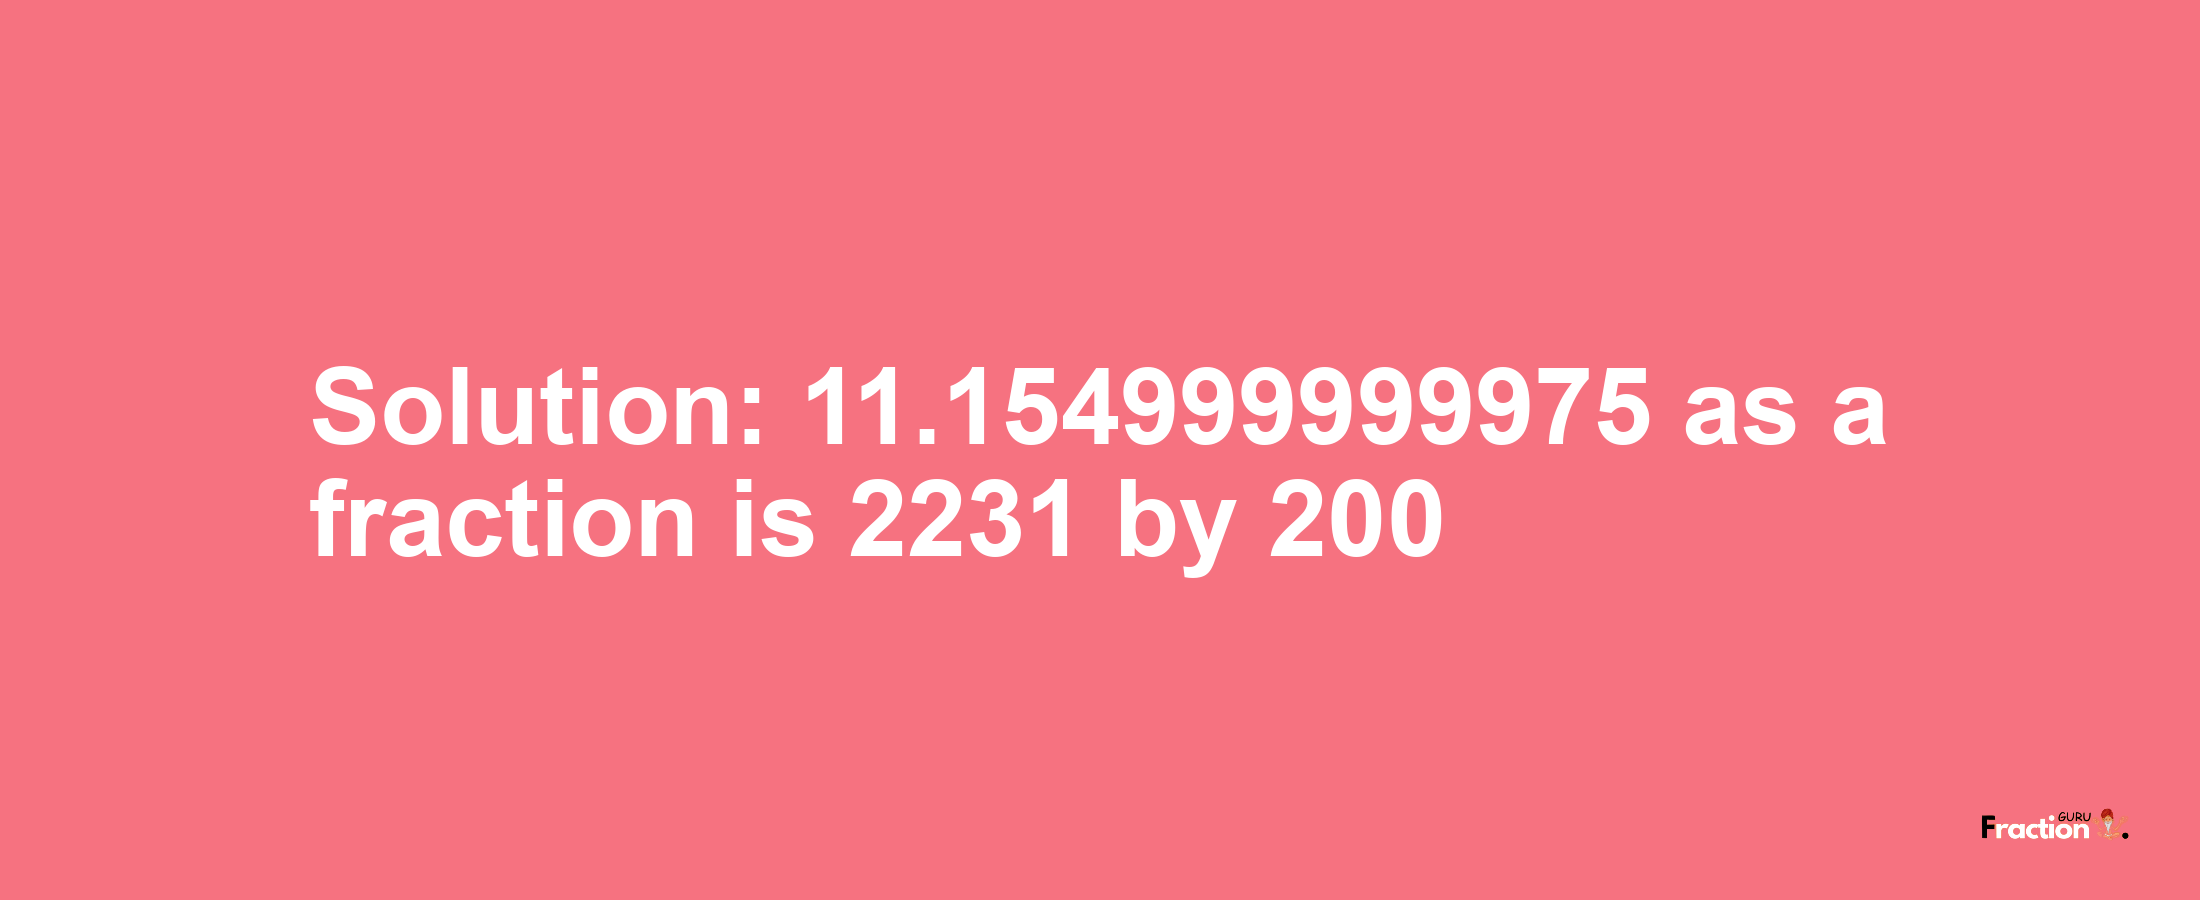 Solution:11.154999999975 as a fraction is 2231/200